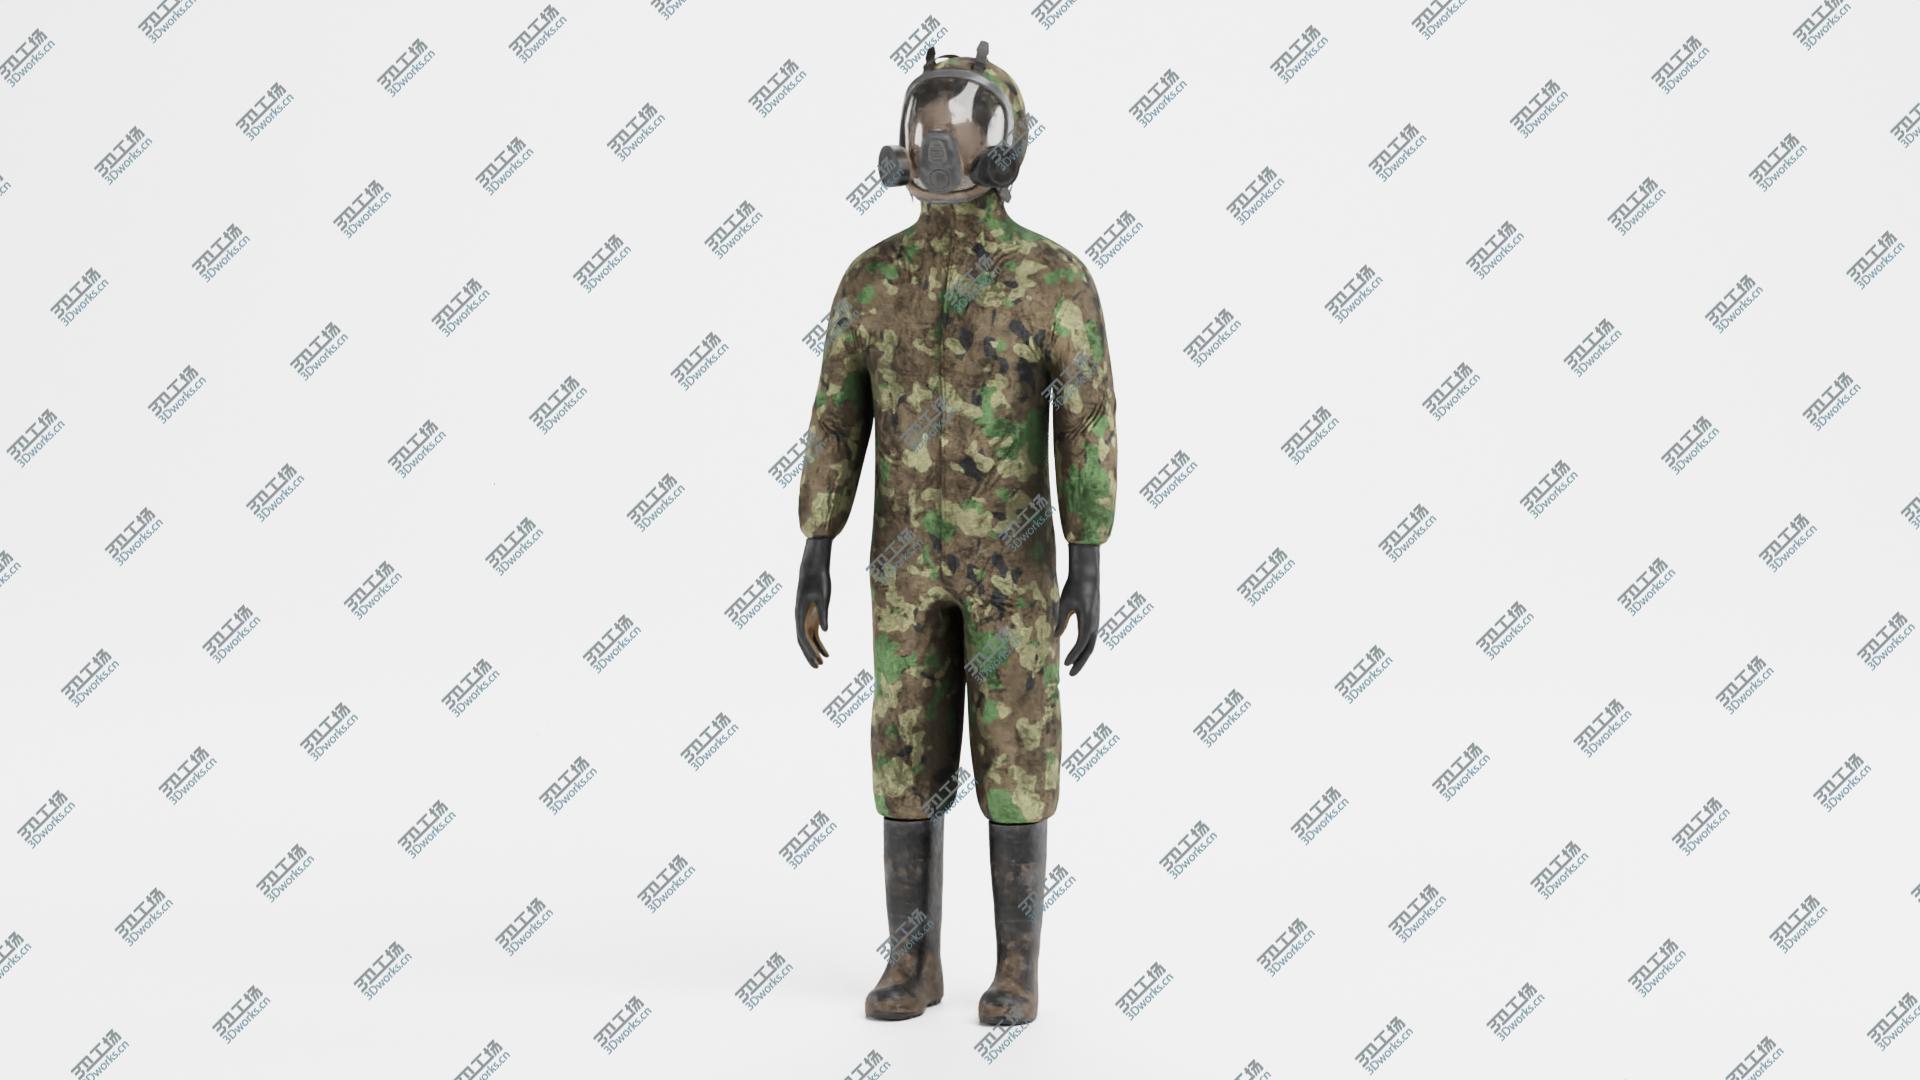 images/goods_img/202104093/Protective Suit 4 3D model/2.jpg